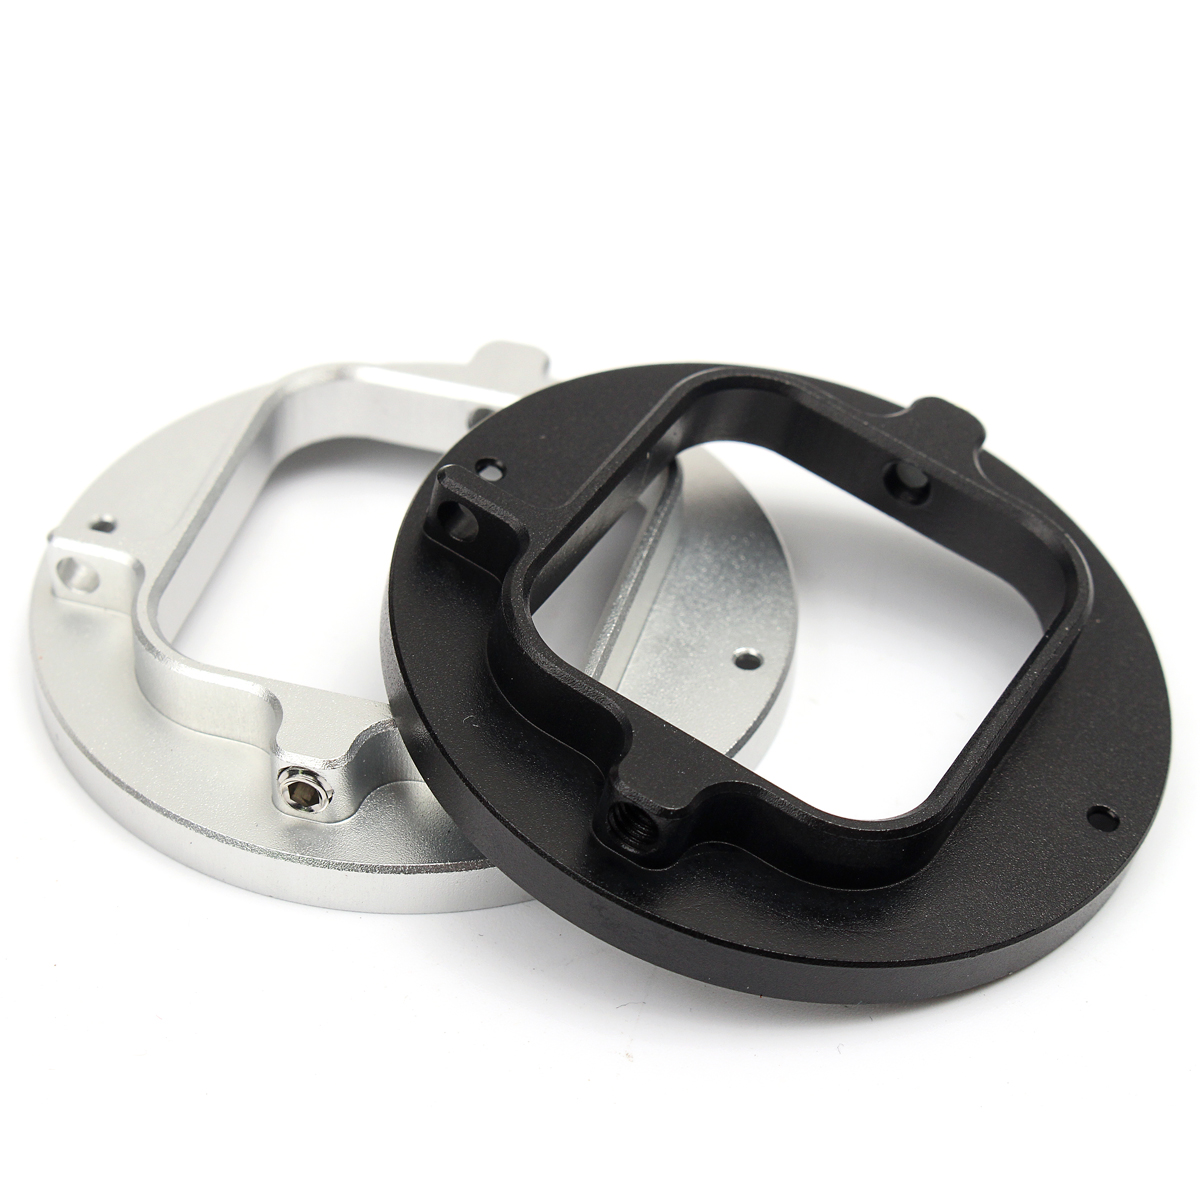 Features:  Mount to UV lens, gradient filter lens, polarizing lens of diameter on to the GoPro Hero